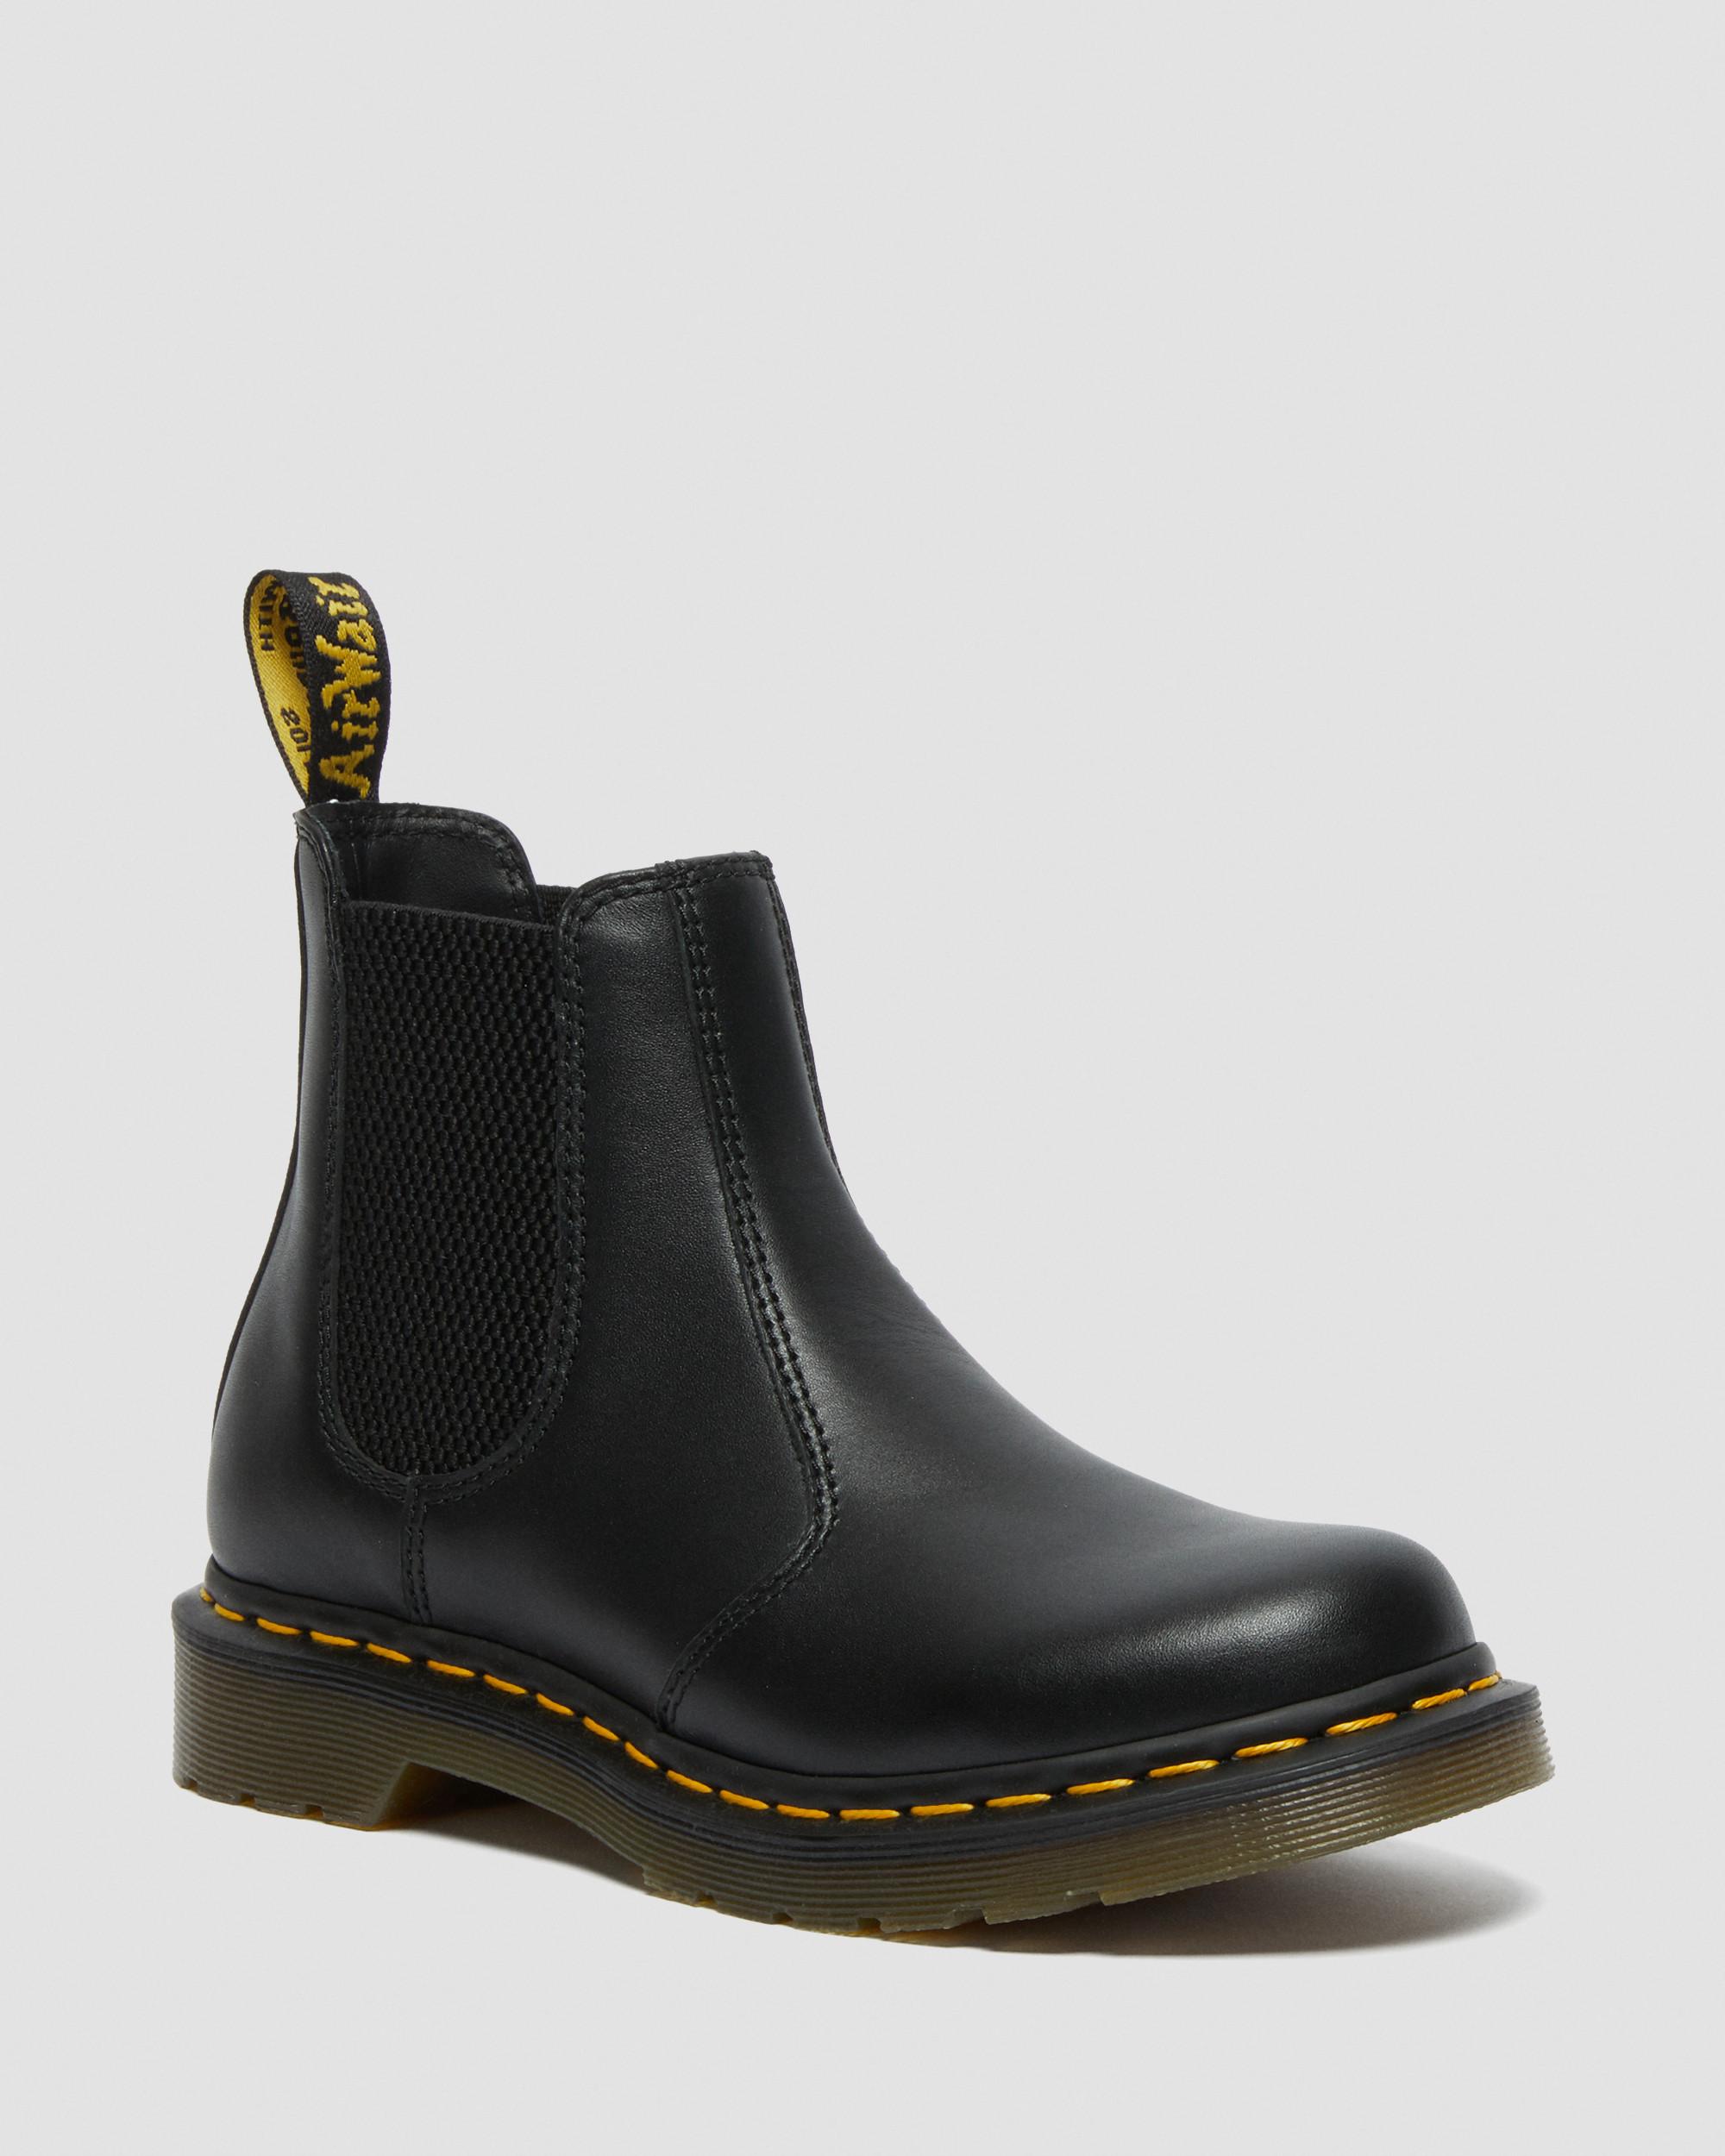 Women's 2976 Nappa Leather Chelsea Boots, | Dr. Martens